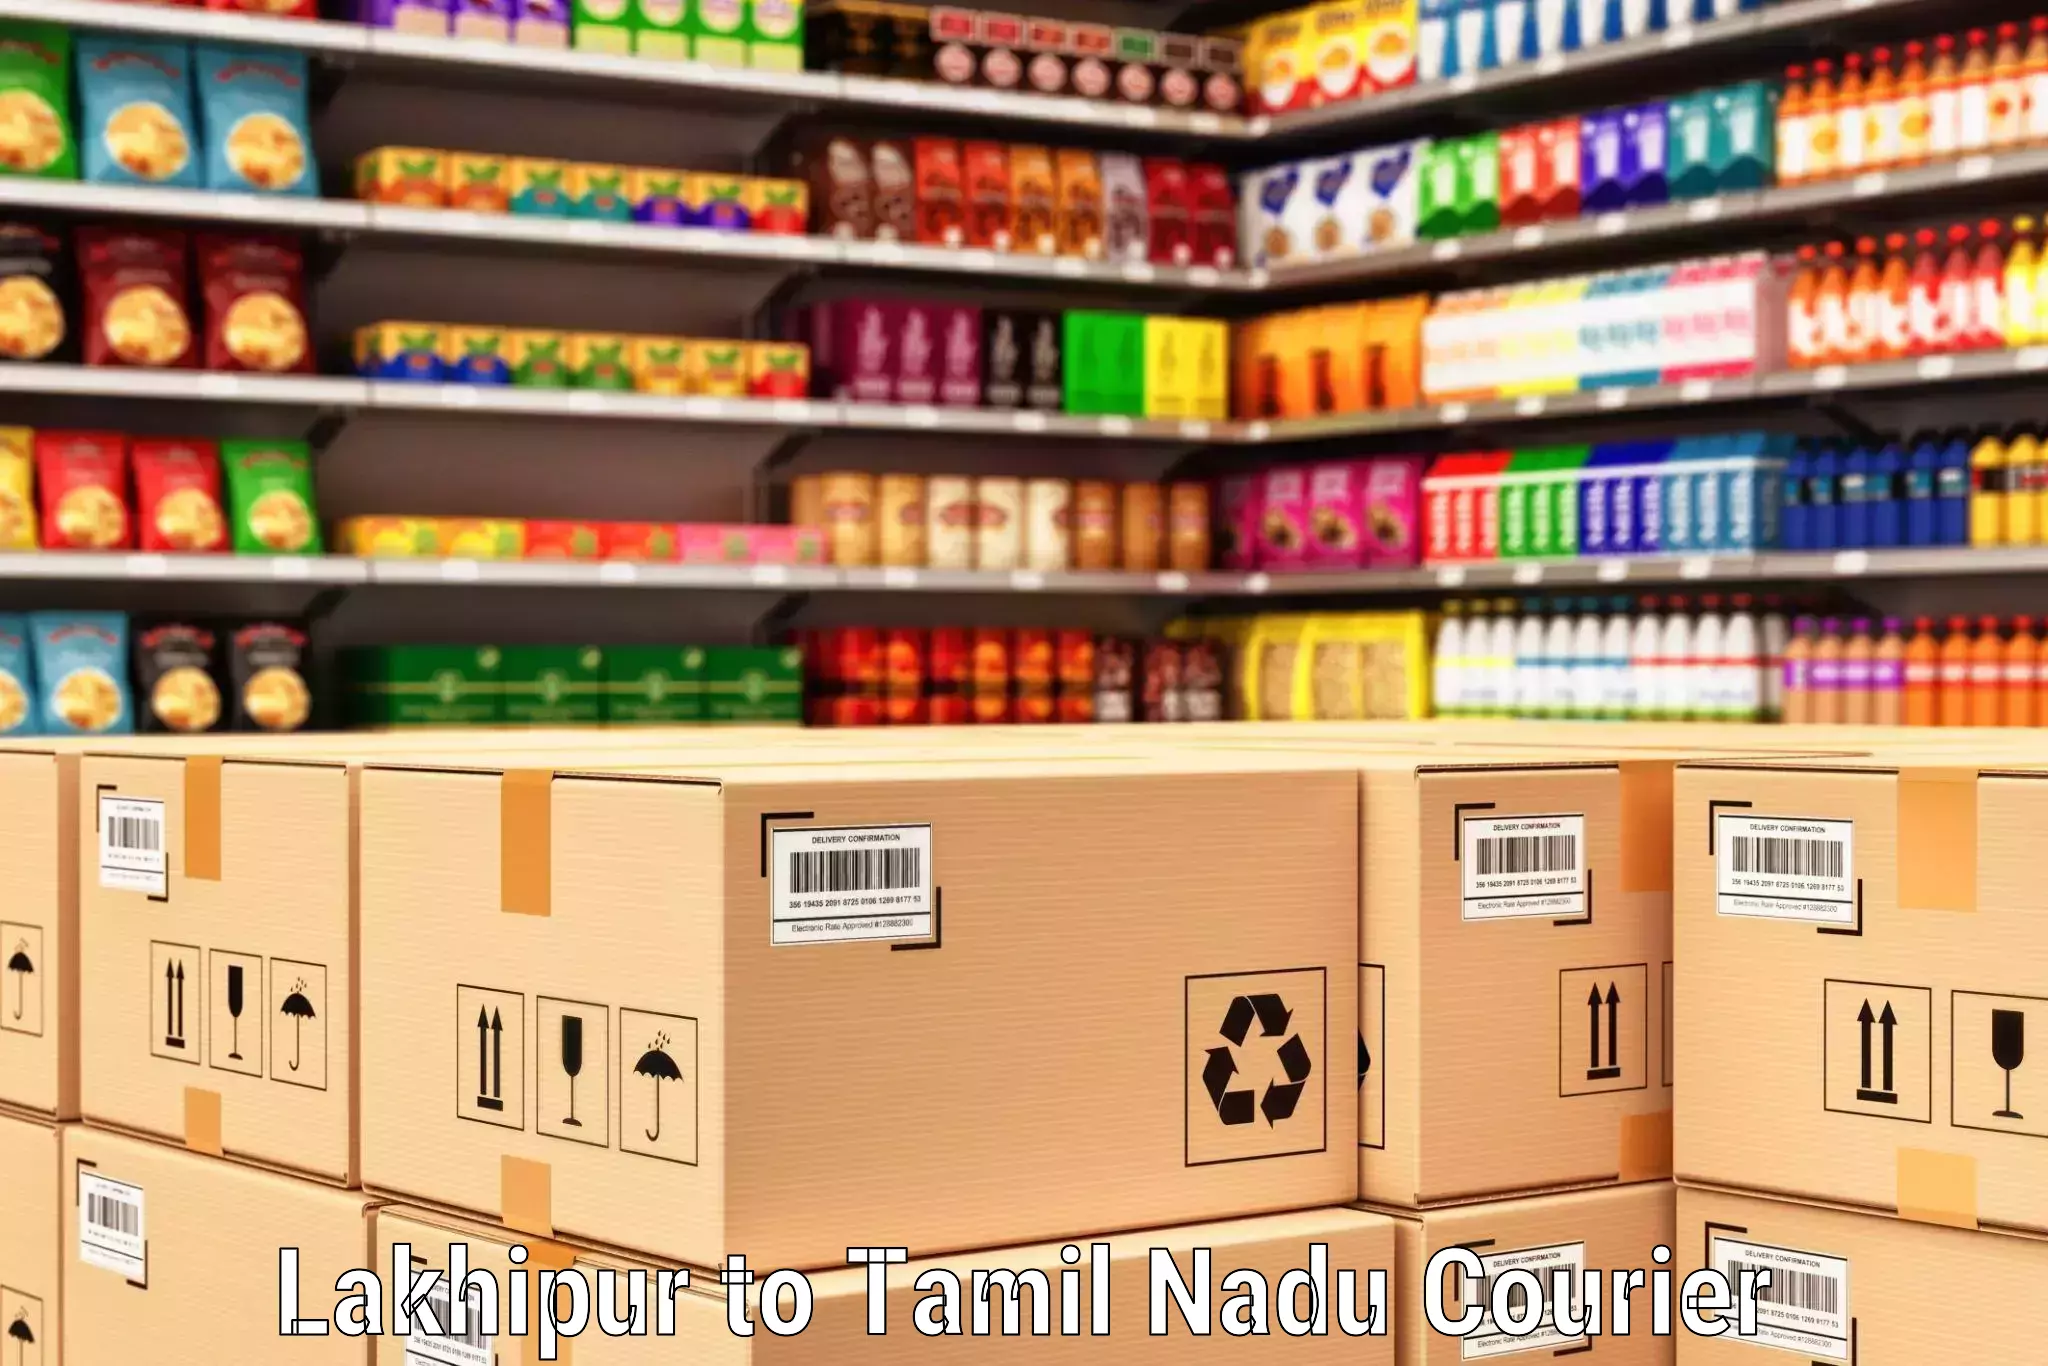 User-friendly delivery service Lakhipur to Tiruvallur